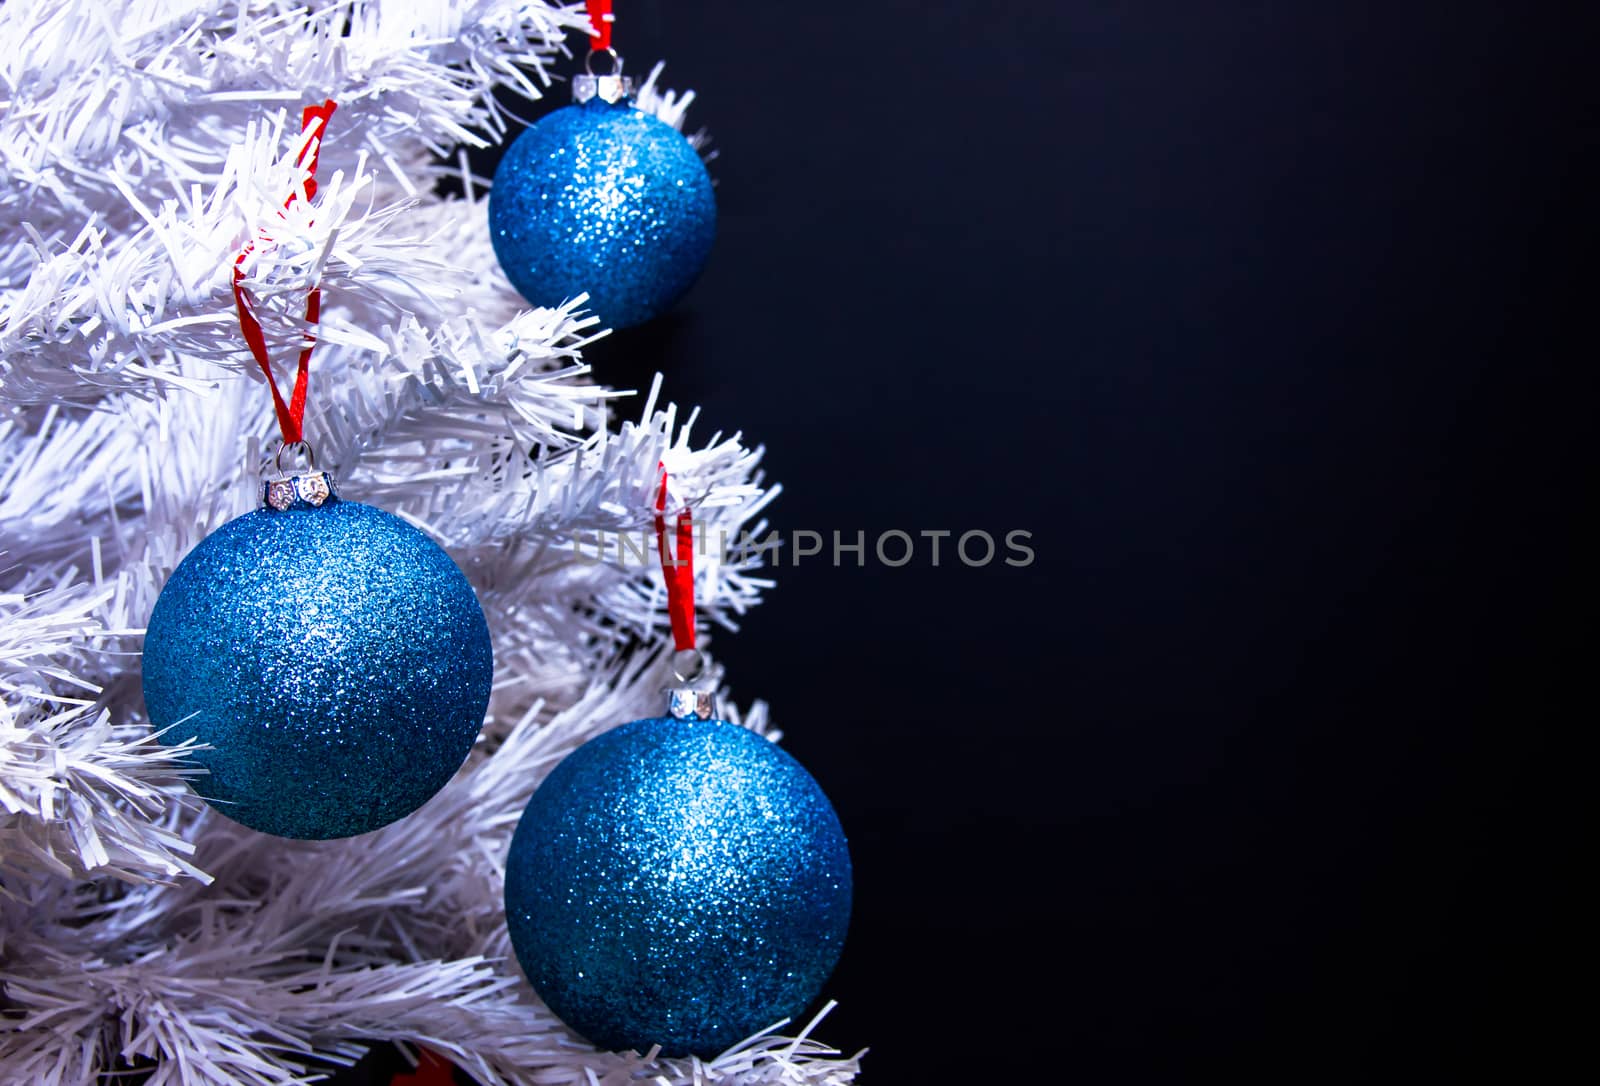 Christmas balls on tree with white branches to close